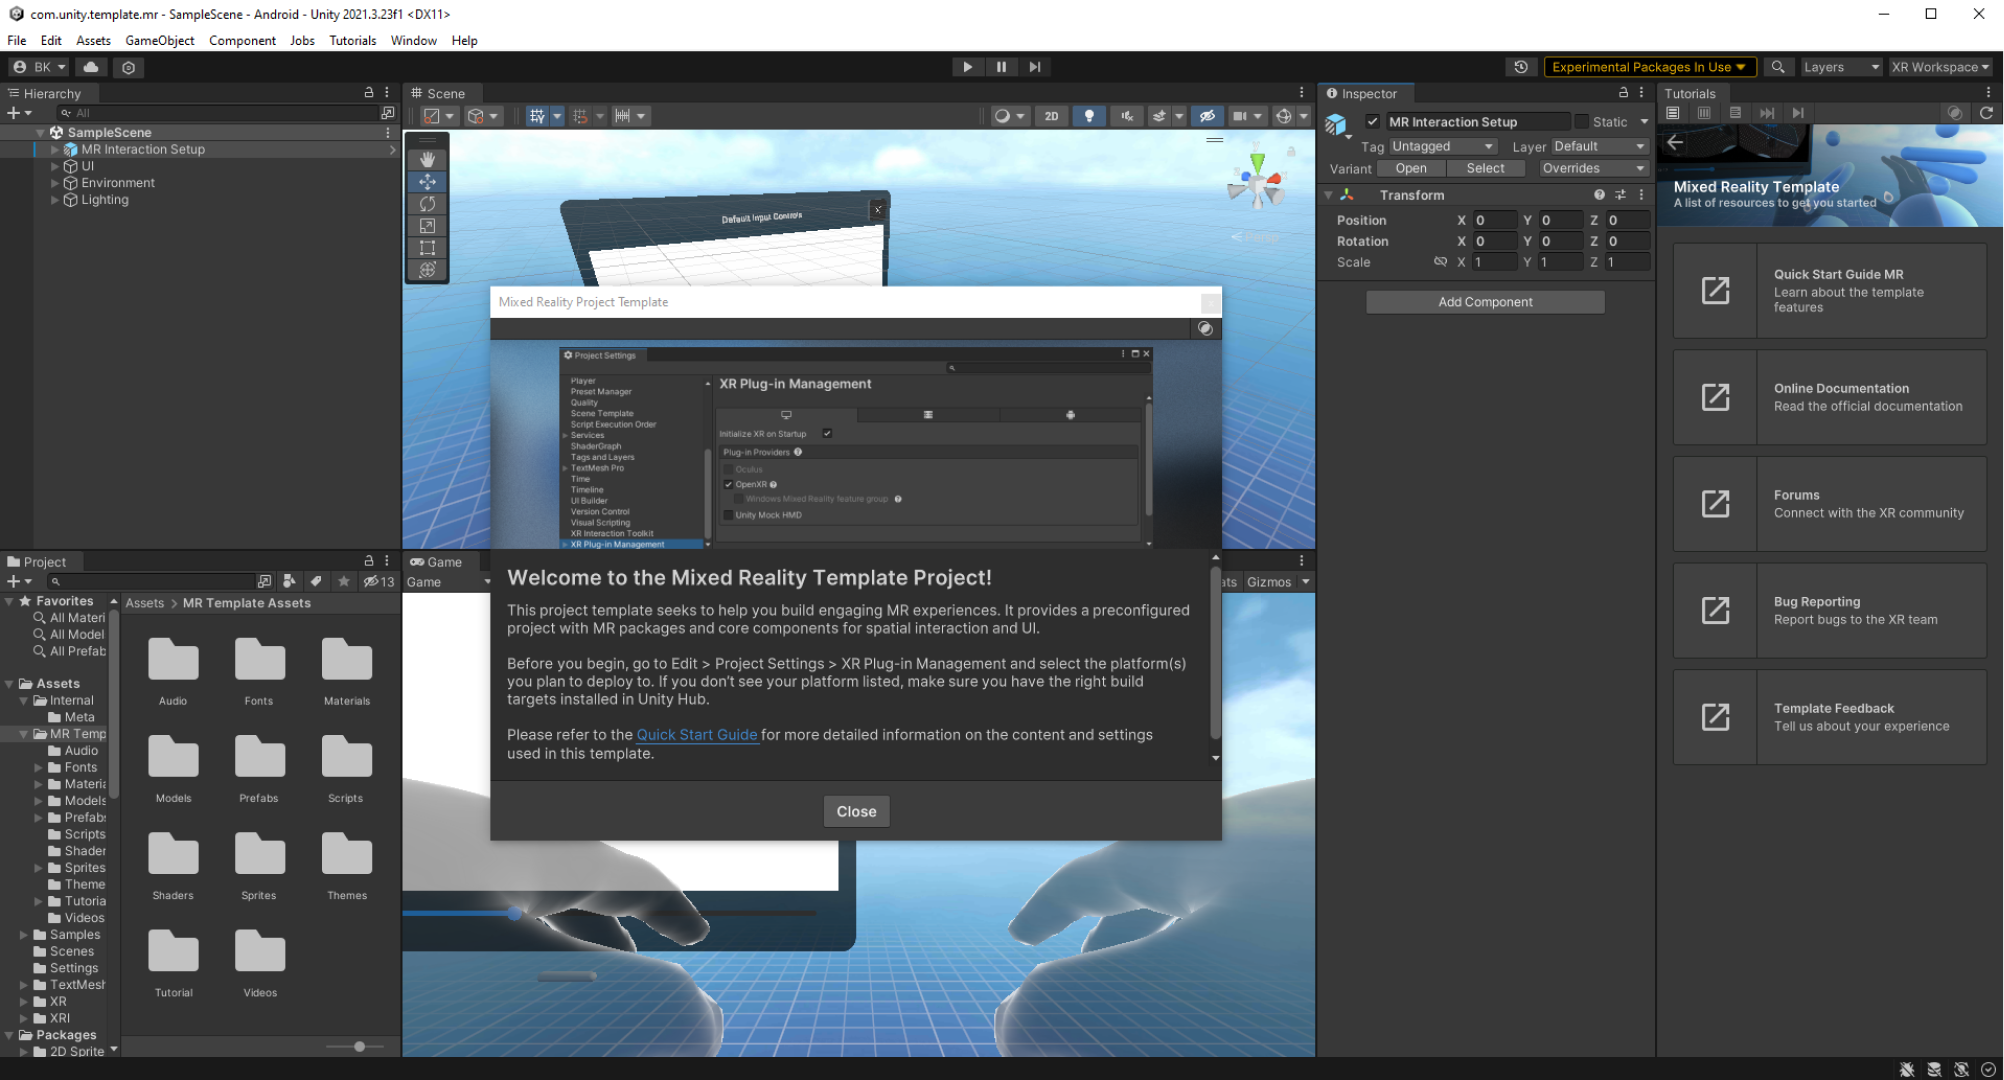 Unity Editor displaying the welcome window of the mixed reality template overlaid on top of a mixed reality template project.